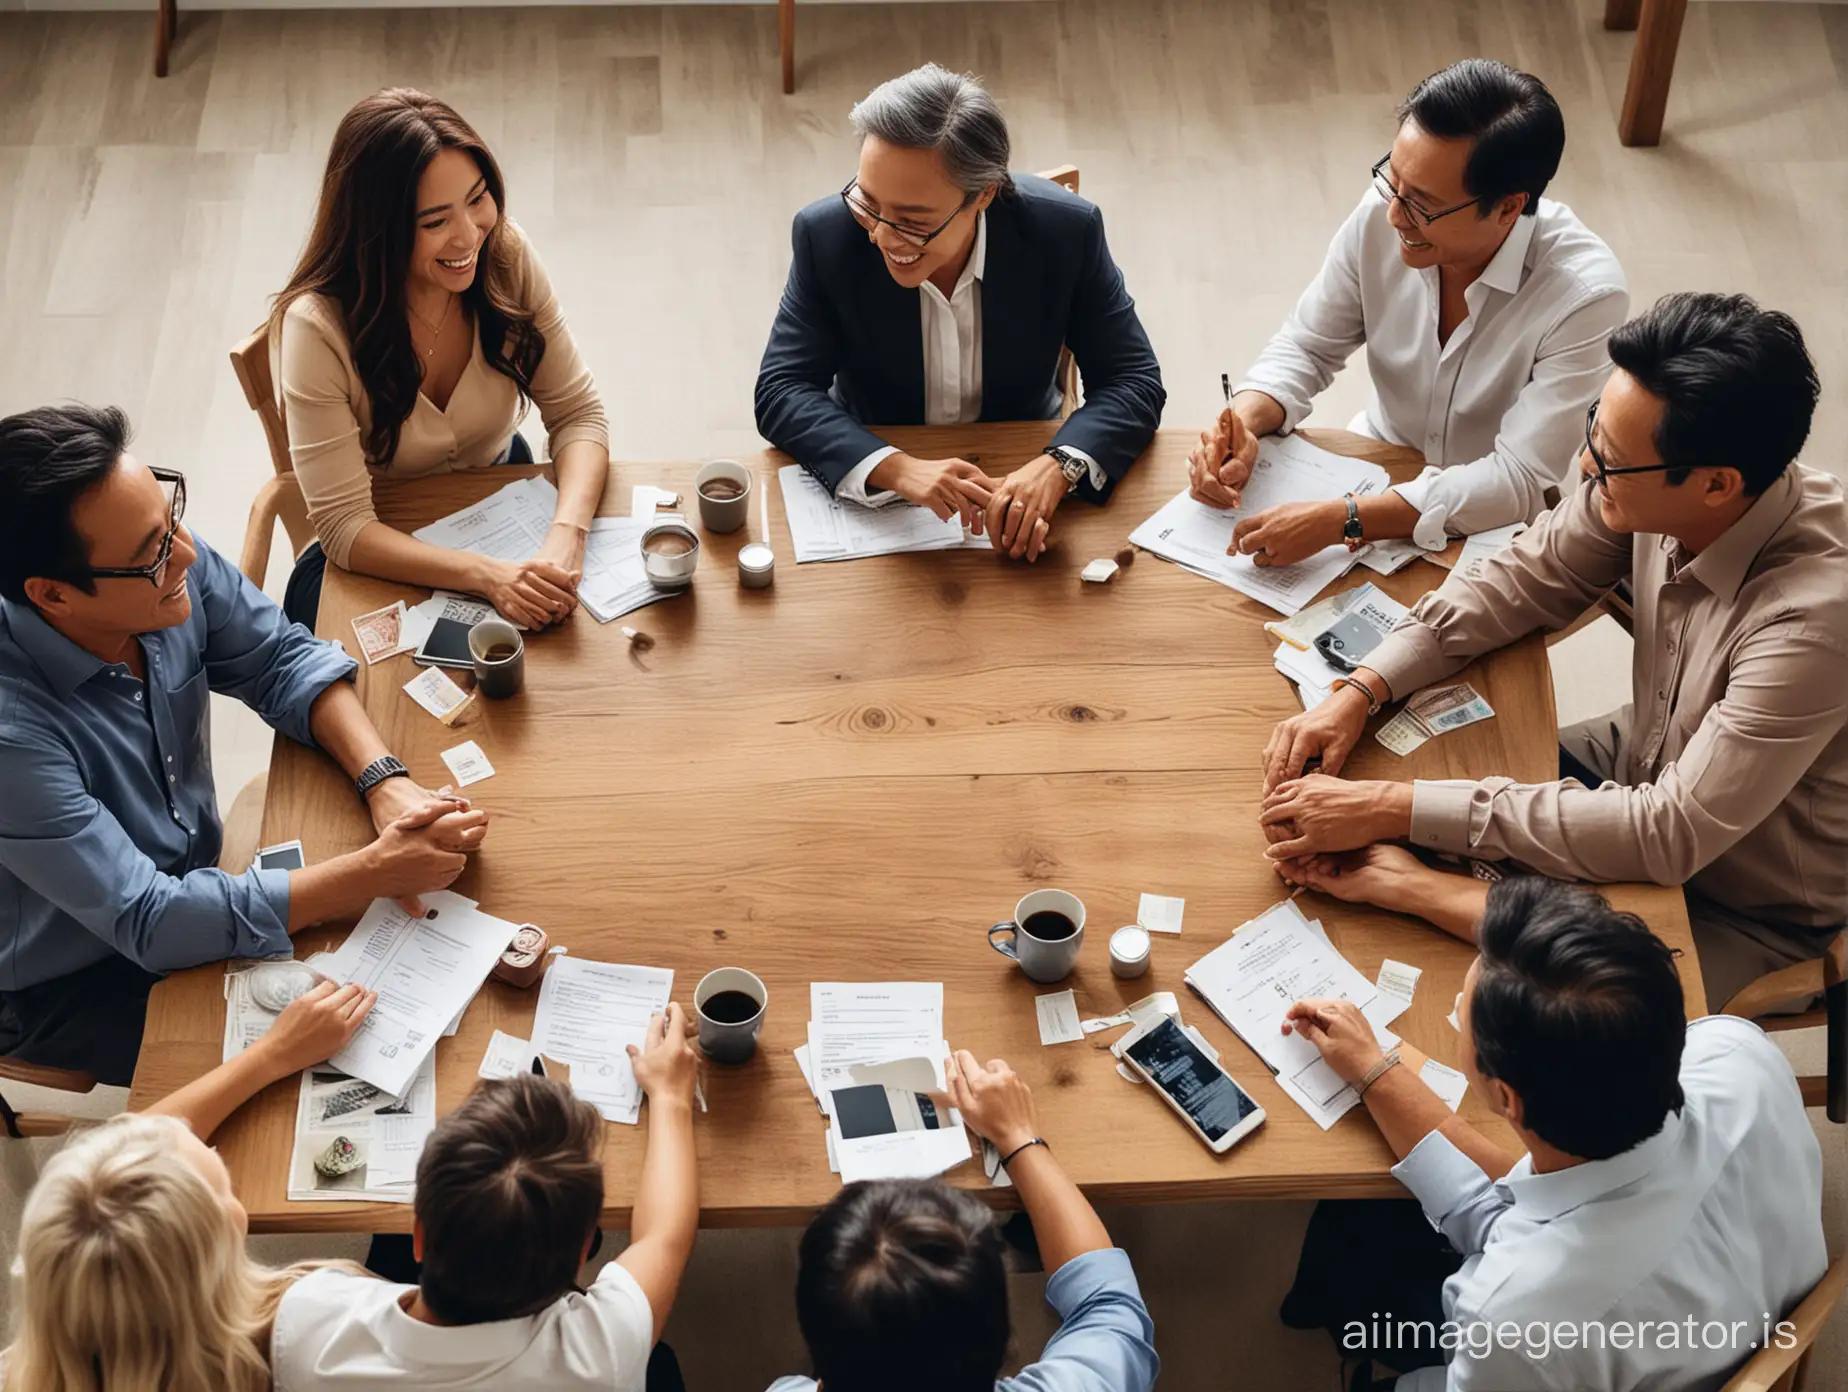 An image of a diverse group of people of different generations and races, engaged in a meaningful conversation around a table, symbolizing the importance of financial wisdom, long-term planning, and generational wealth. The photo captures a moment of shared knowledge and financial empowerment, echoing the insightful words of Robert Kiyosaki."
